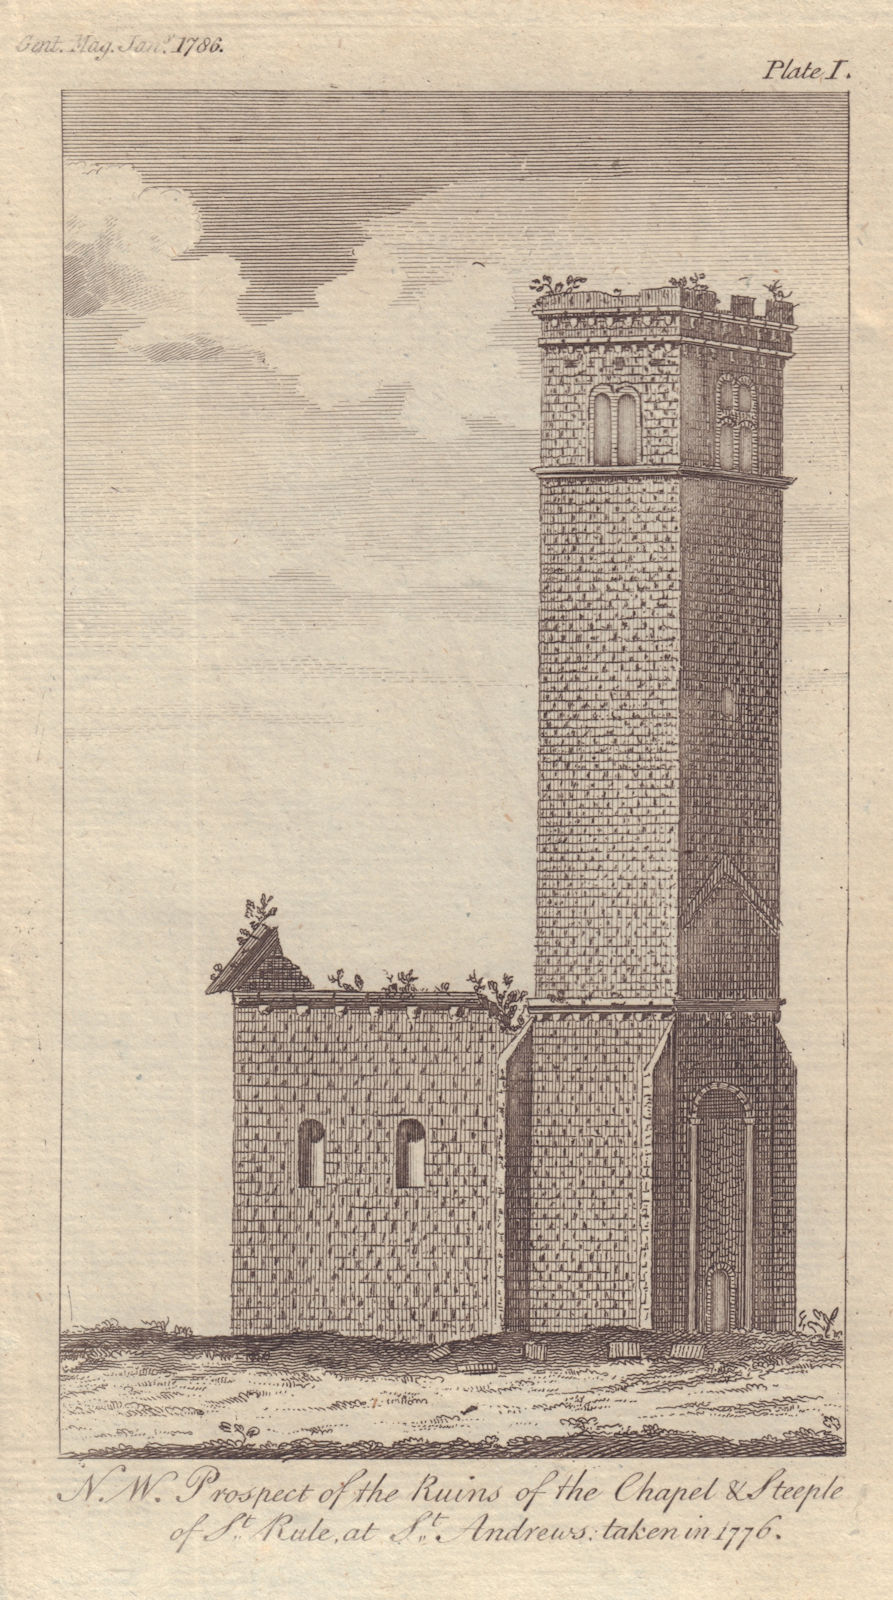 NW Prospect of the ruins of the Chapel & Steeple of St. Rule at St. Andrews 1786